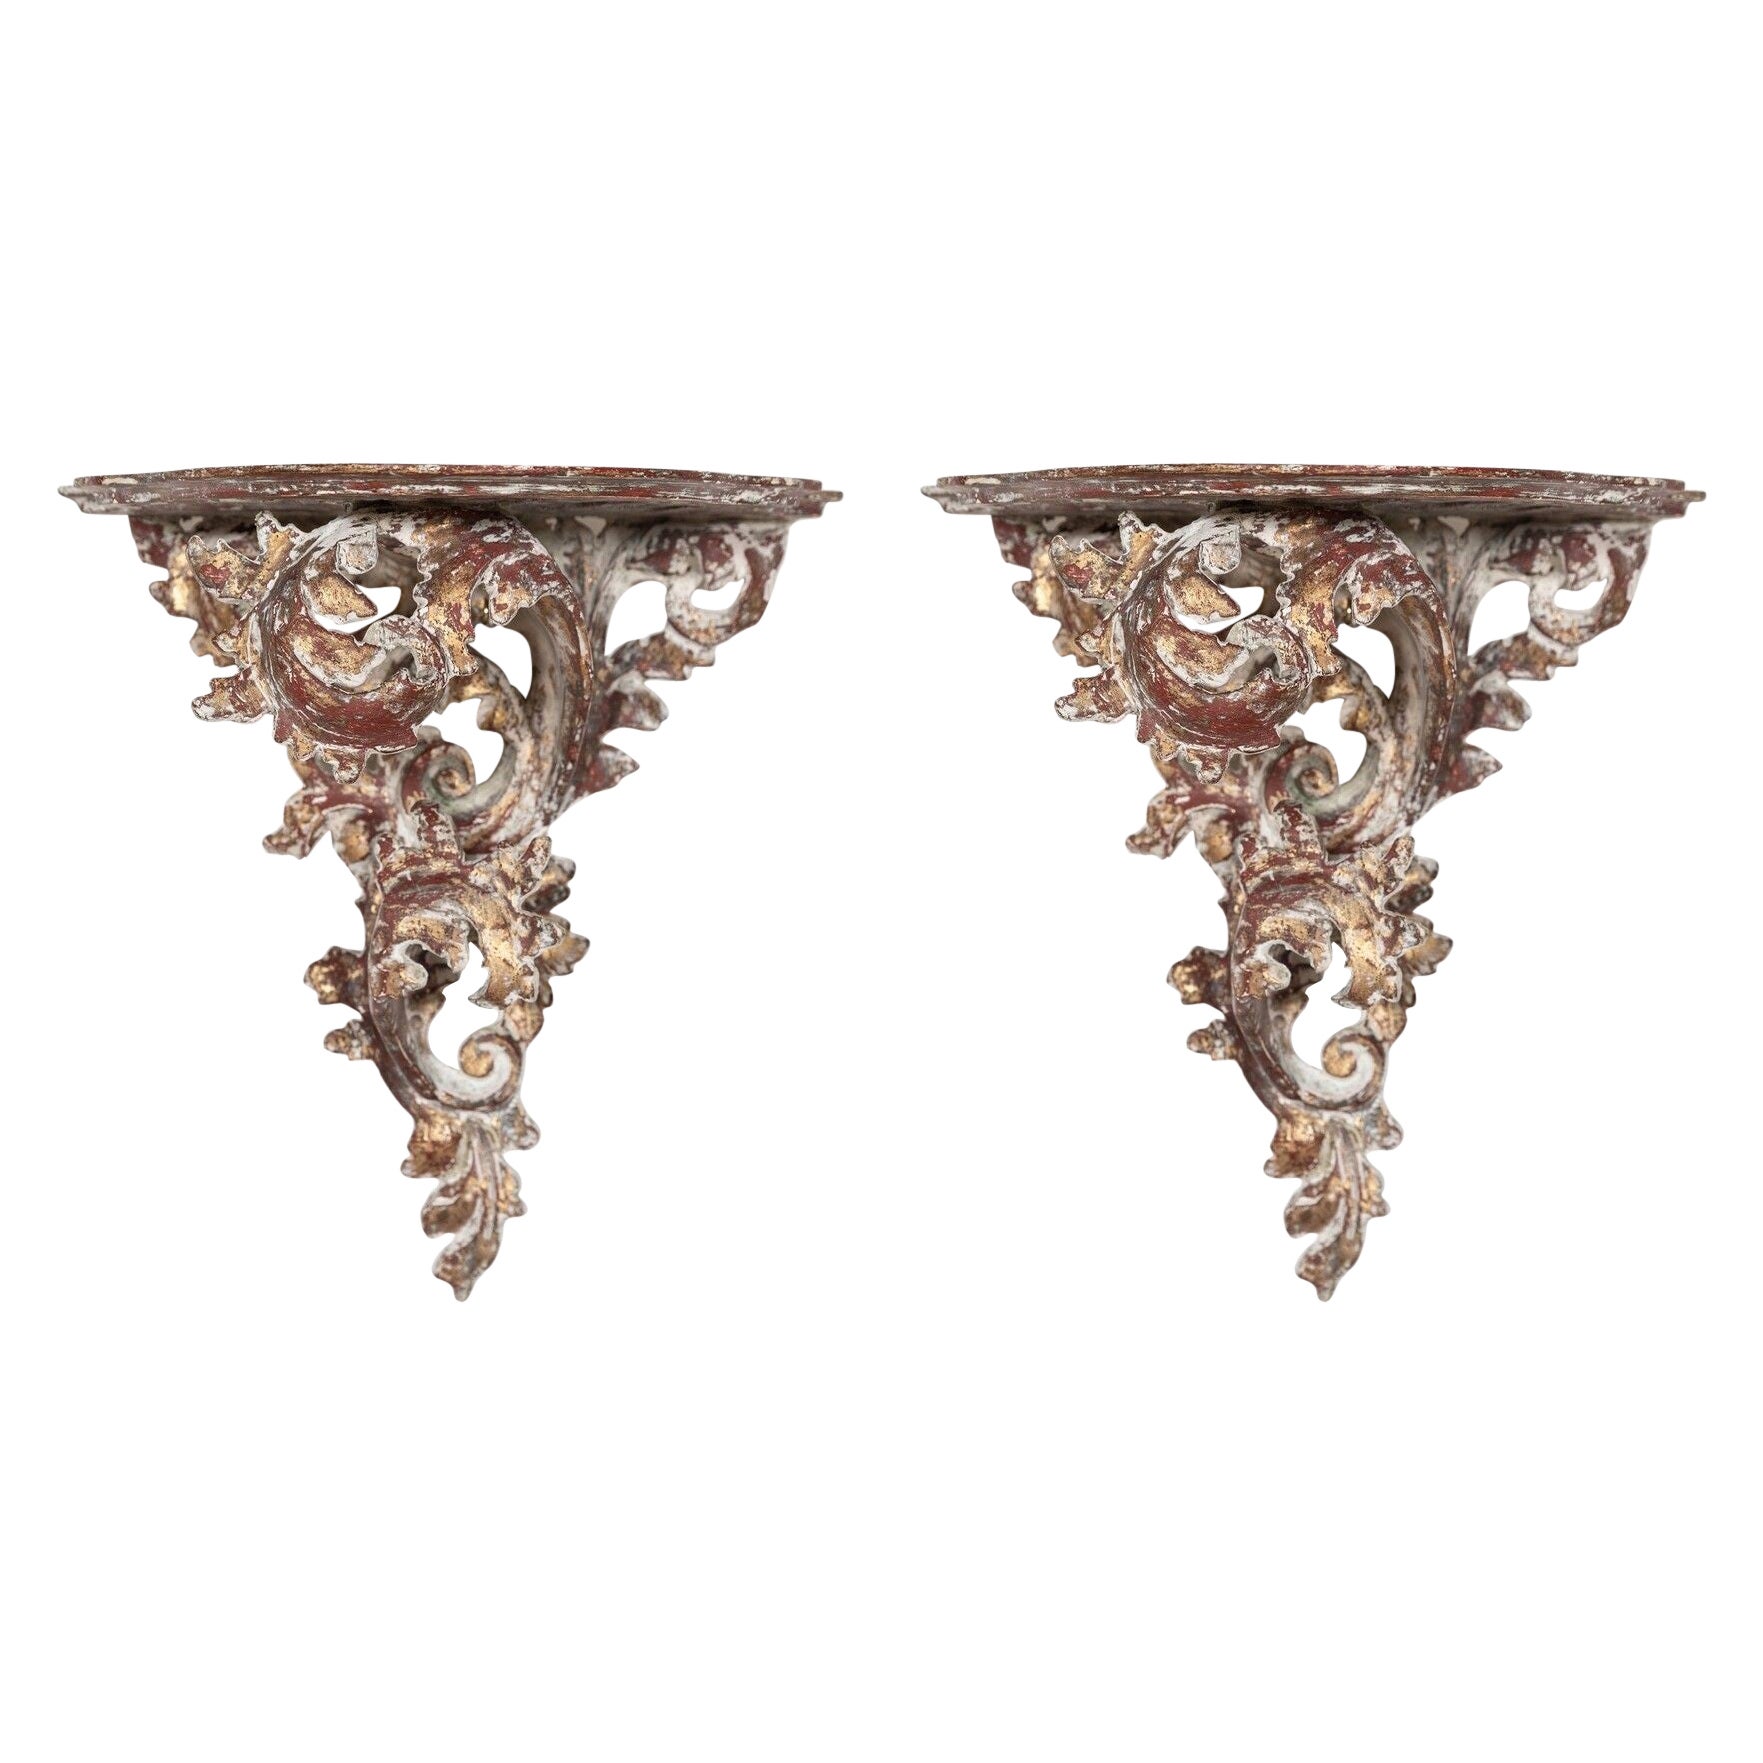 Pair French Giltwood & Gesso Wall Brackets